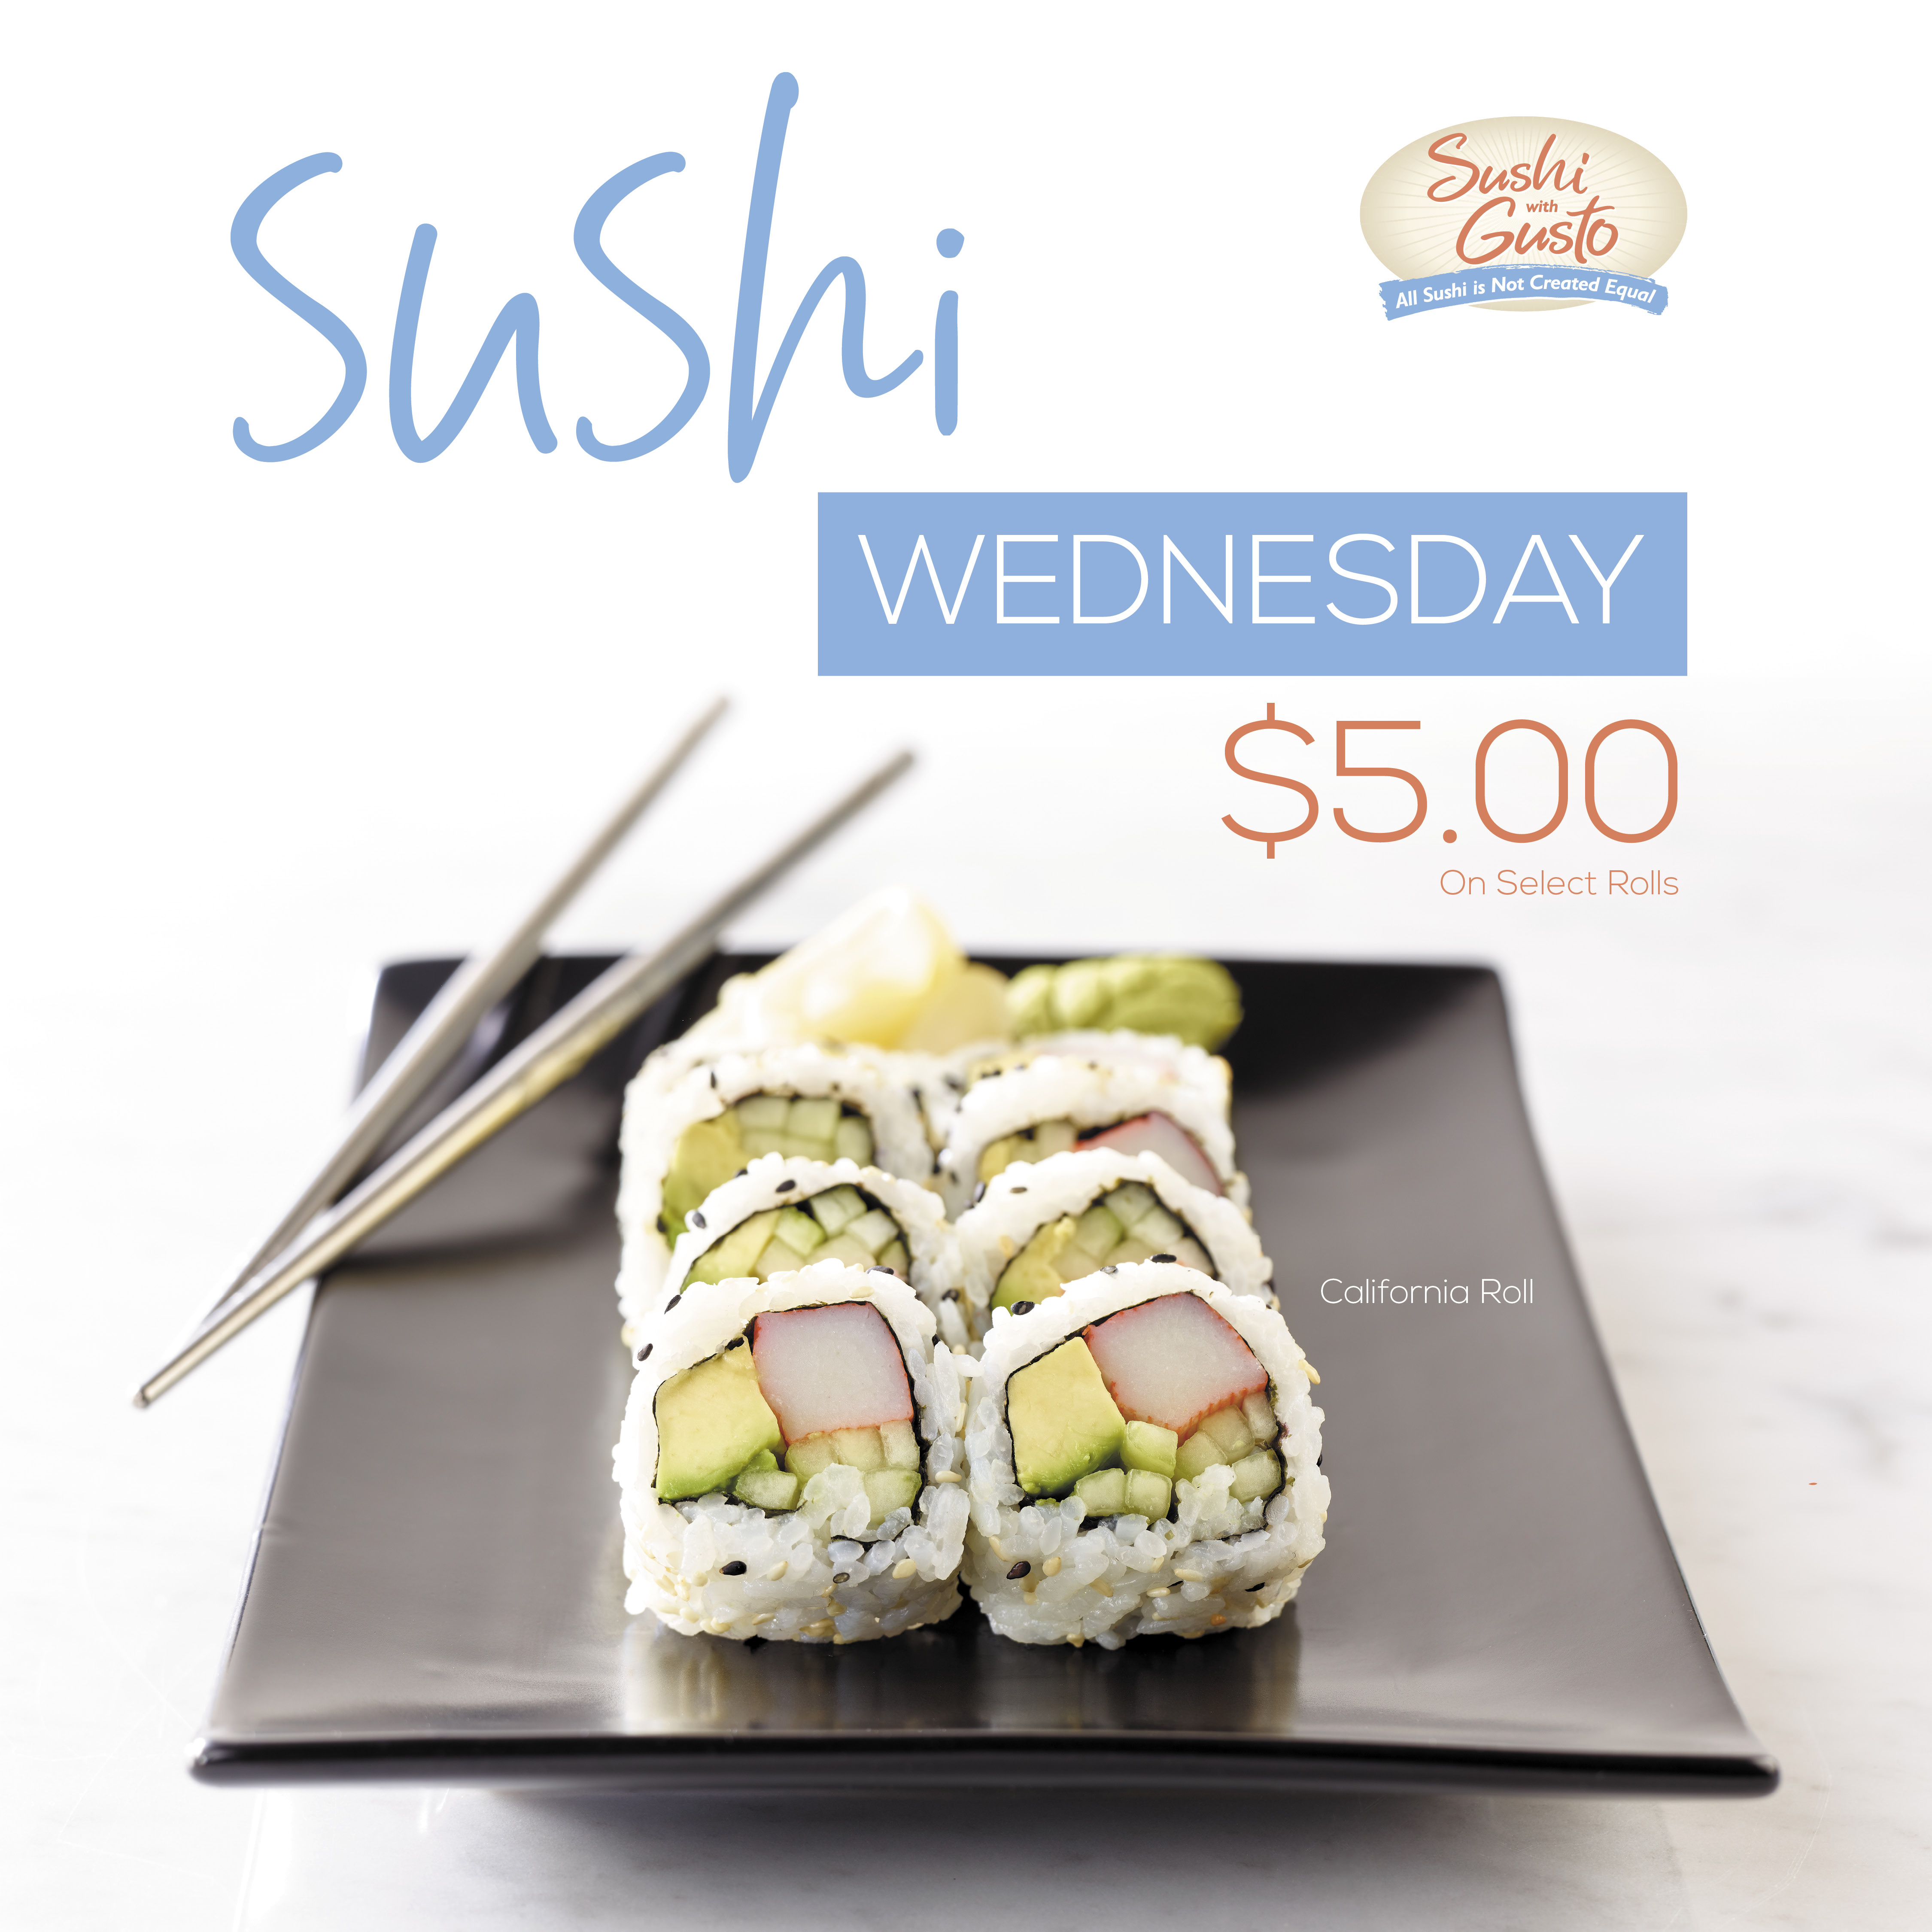 Sushi With Gusto! Wednesday Special